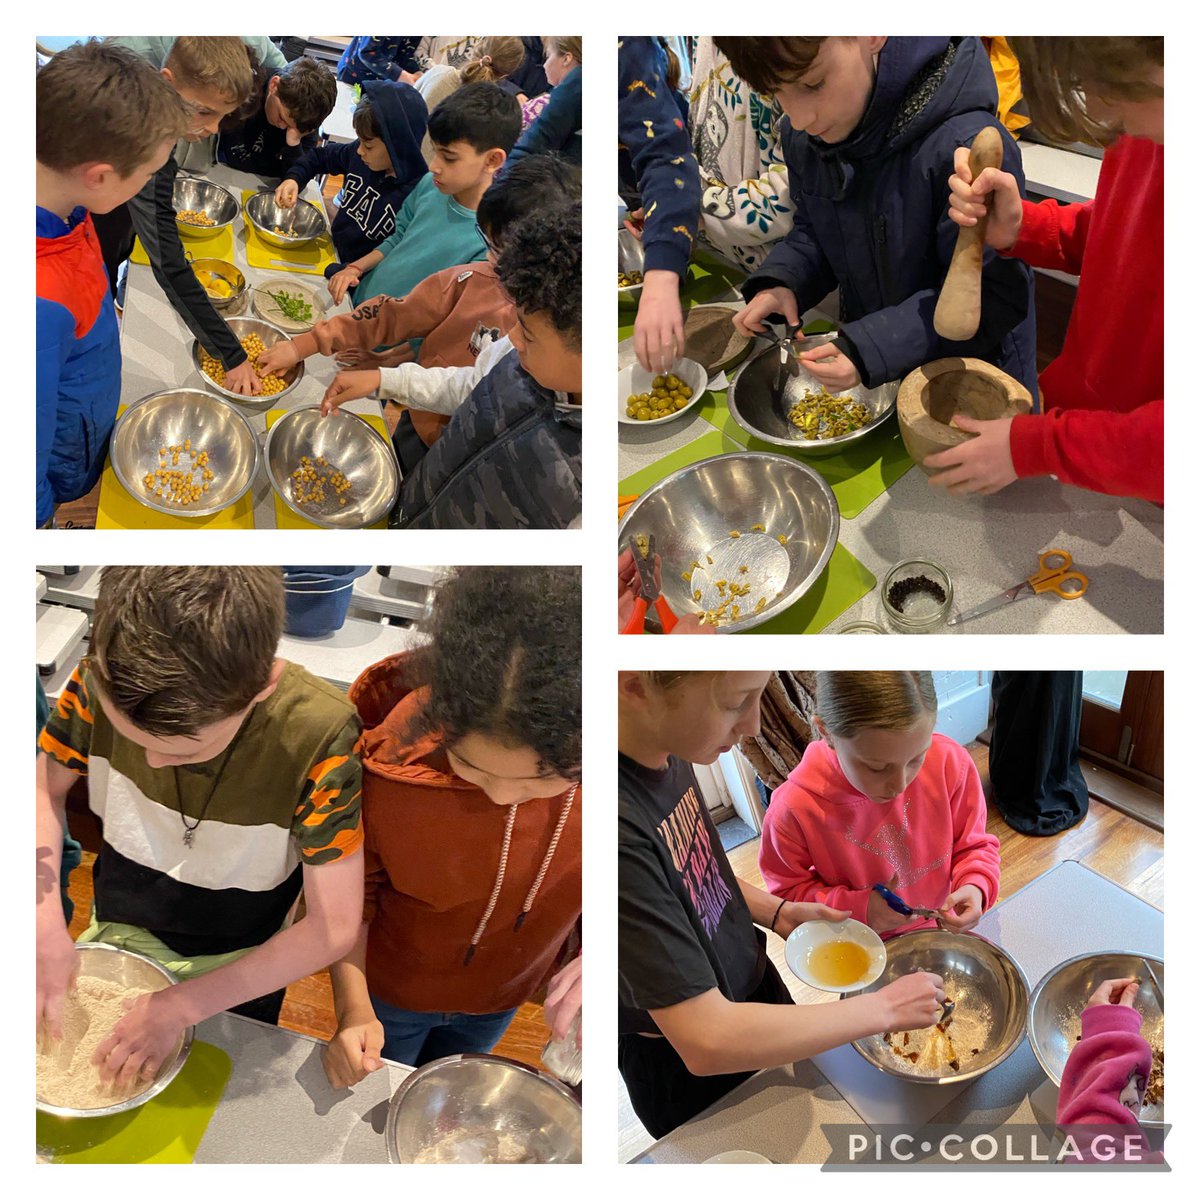 Greek cooking in progress for Y5 @hooke_court . A hive of activity as they make different breads, hummus, tapenade, salad and Greek sweets!